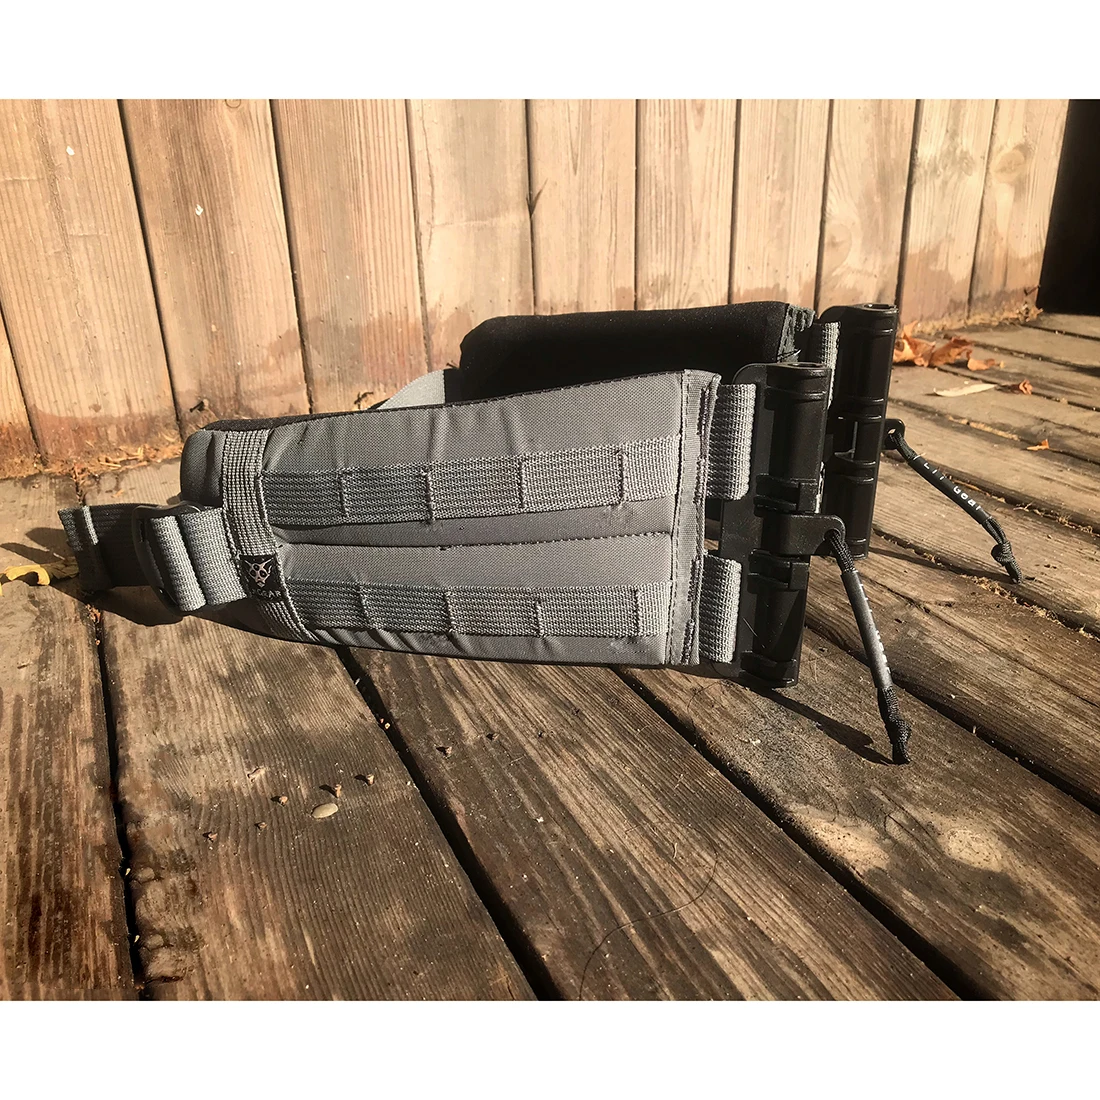 

Lii Gear FS Quick Release Reloaded Waist Seal Tactics Accessories - Coyote Grey (Universal Limited Edition)